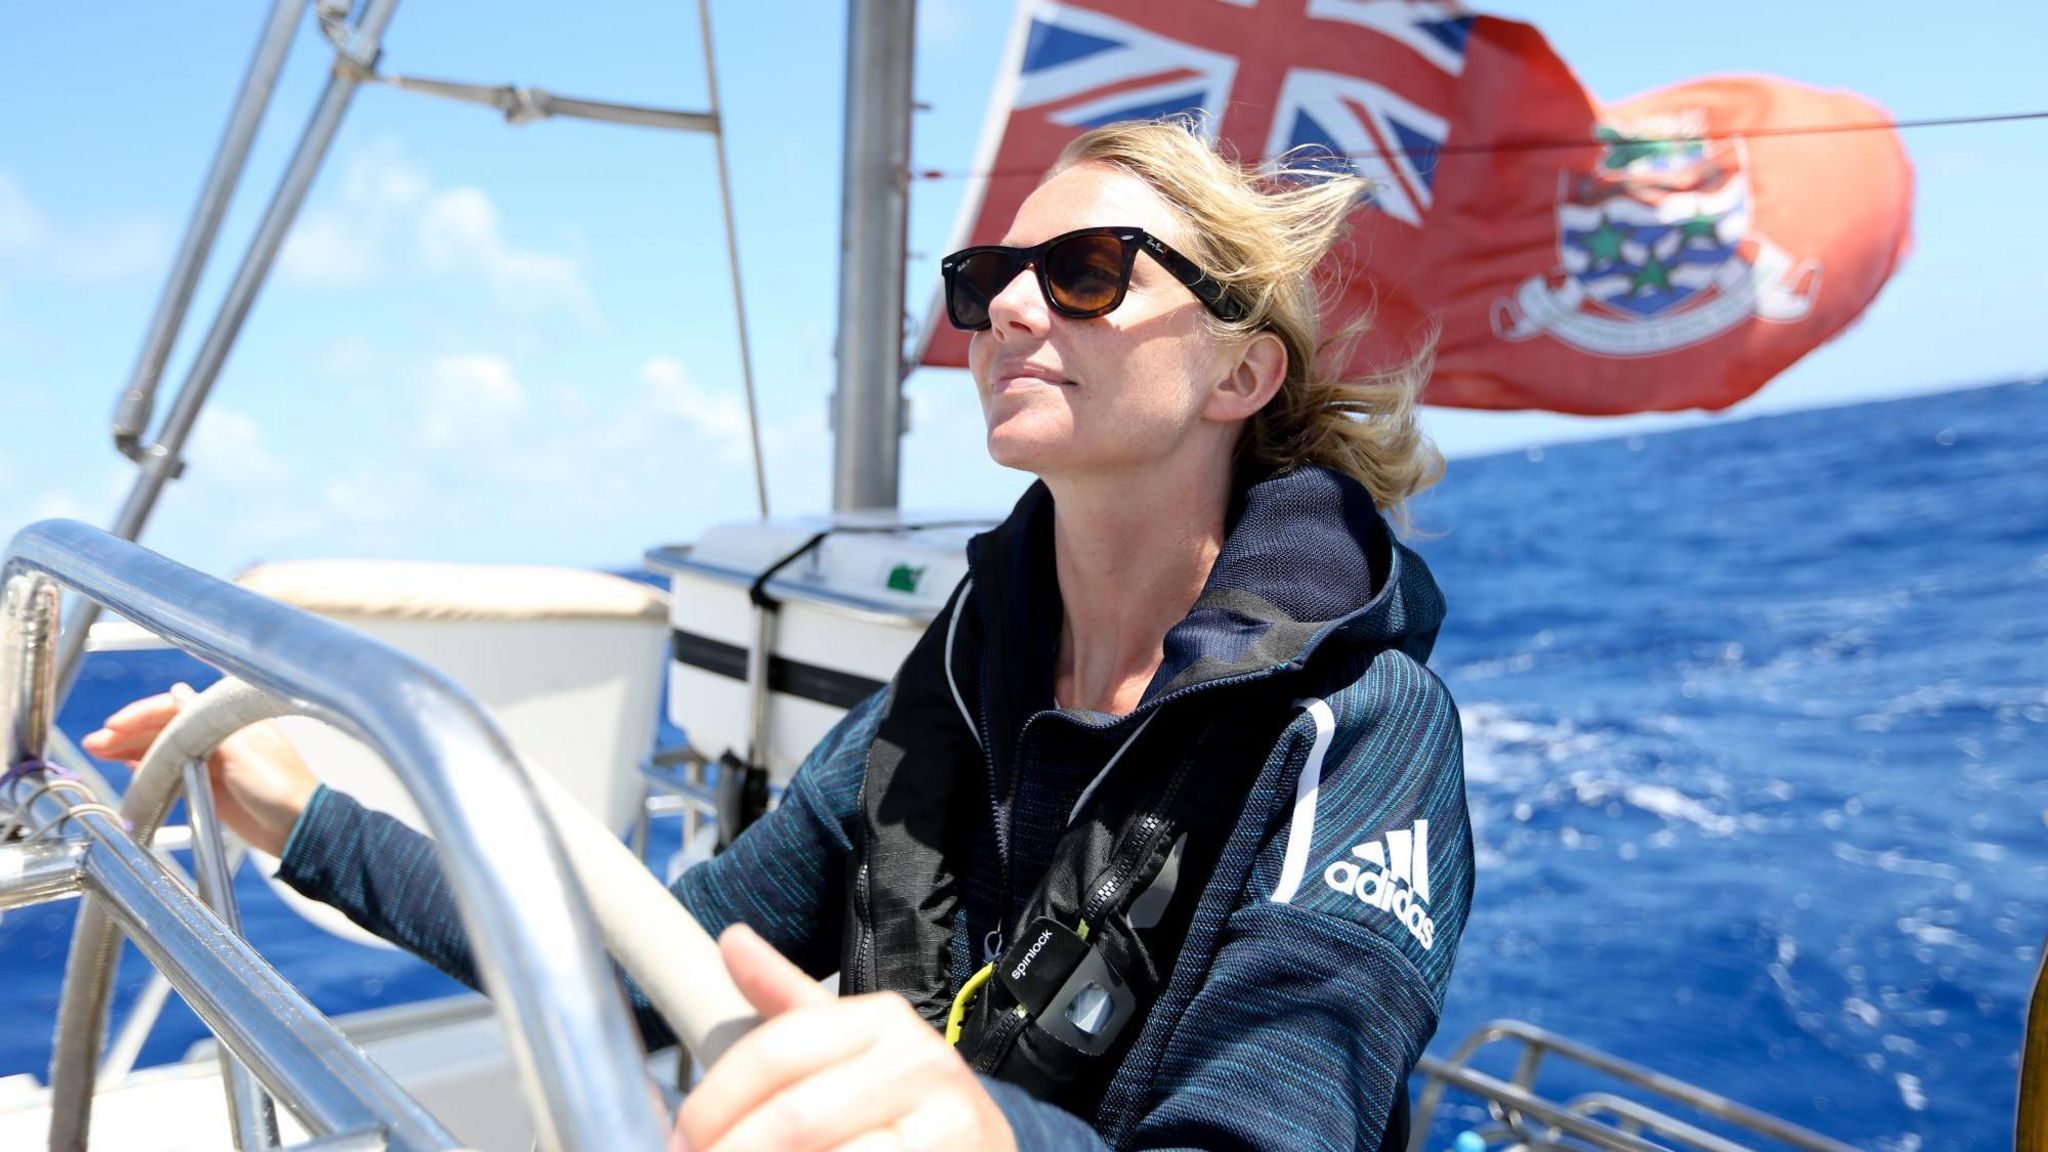 Emily Penn. A woman sailing a boat in the North Pacific. She is blonde and wearing sunglasses